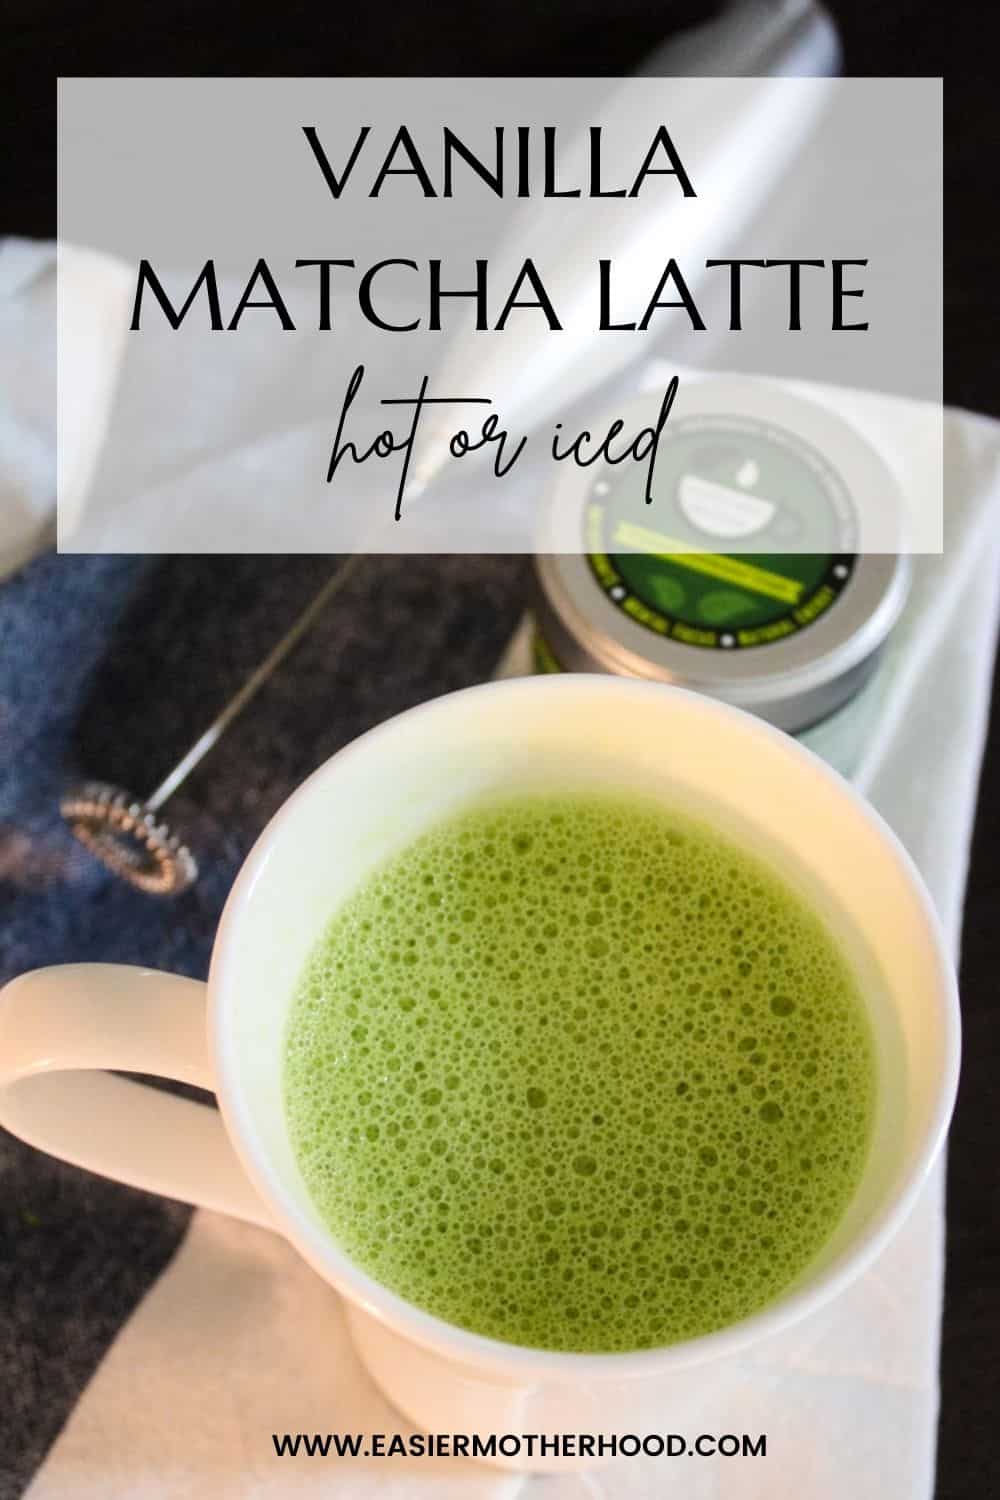 Pin image with vanilla matcha latte, frother, and powder on kitchen towel